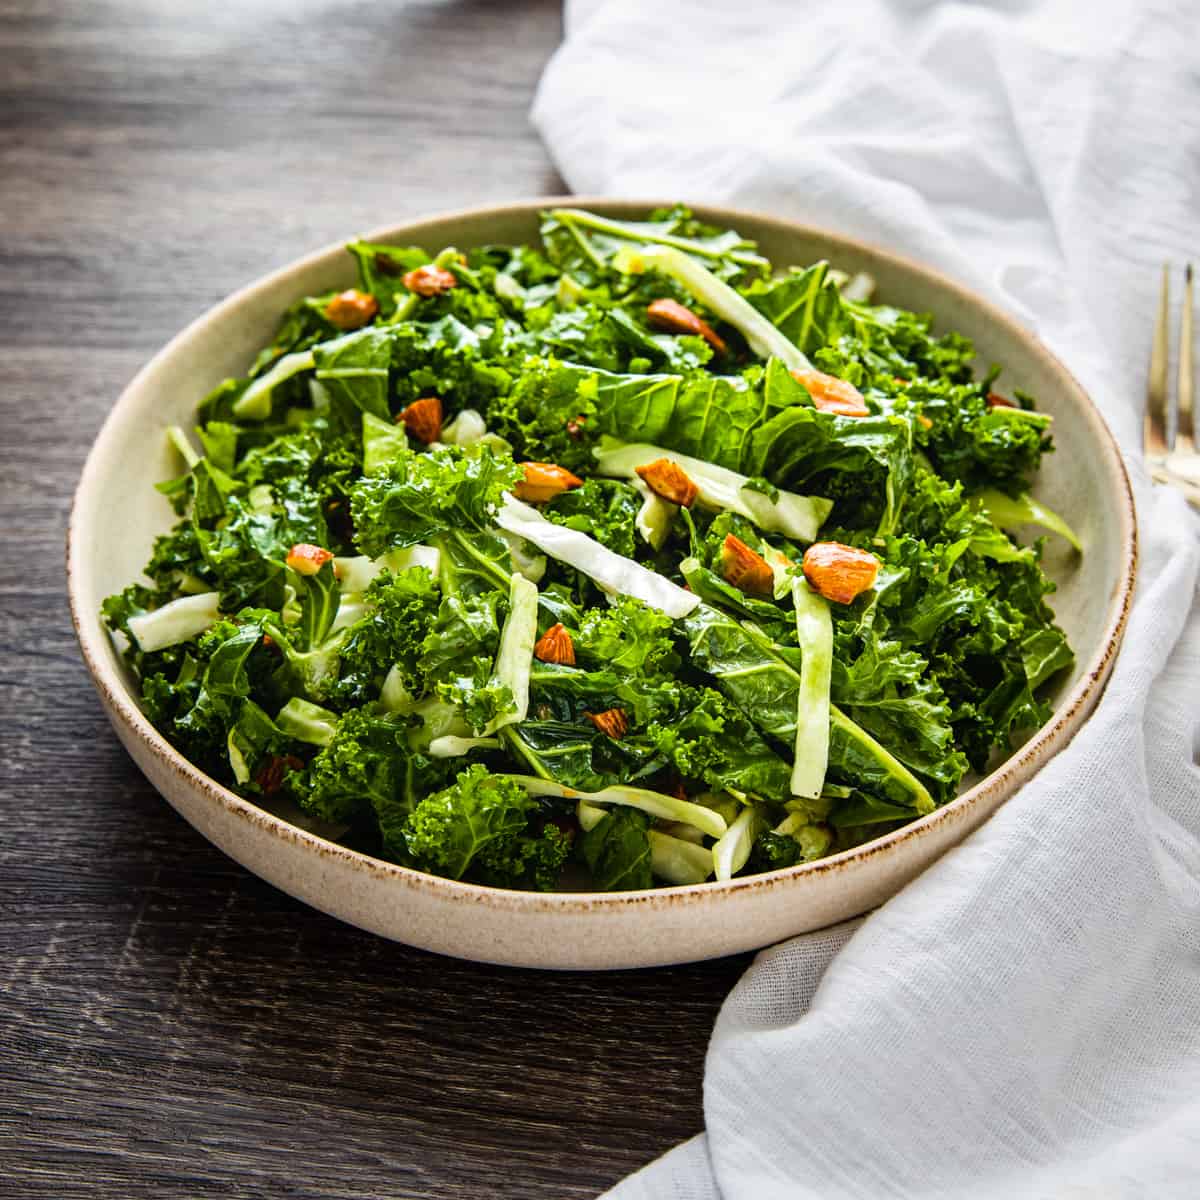 Side angle view of a bowl of kale salad.